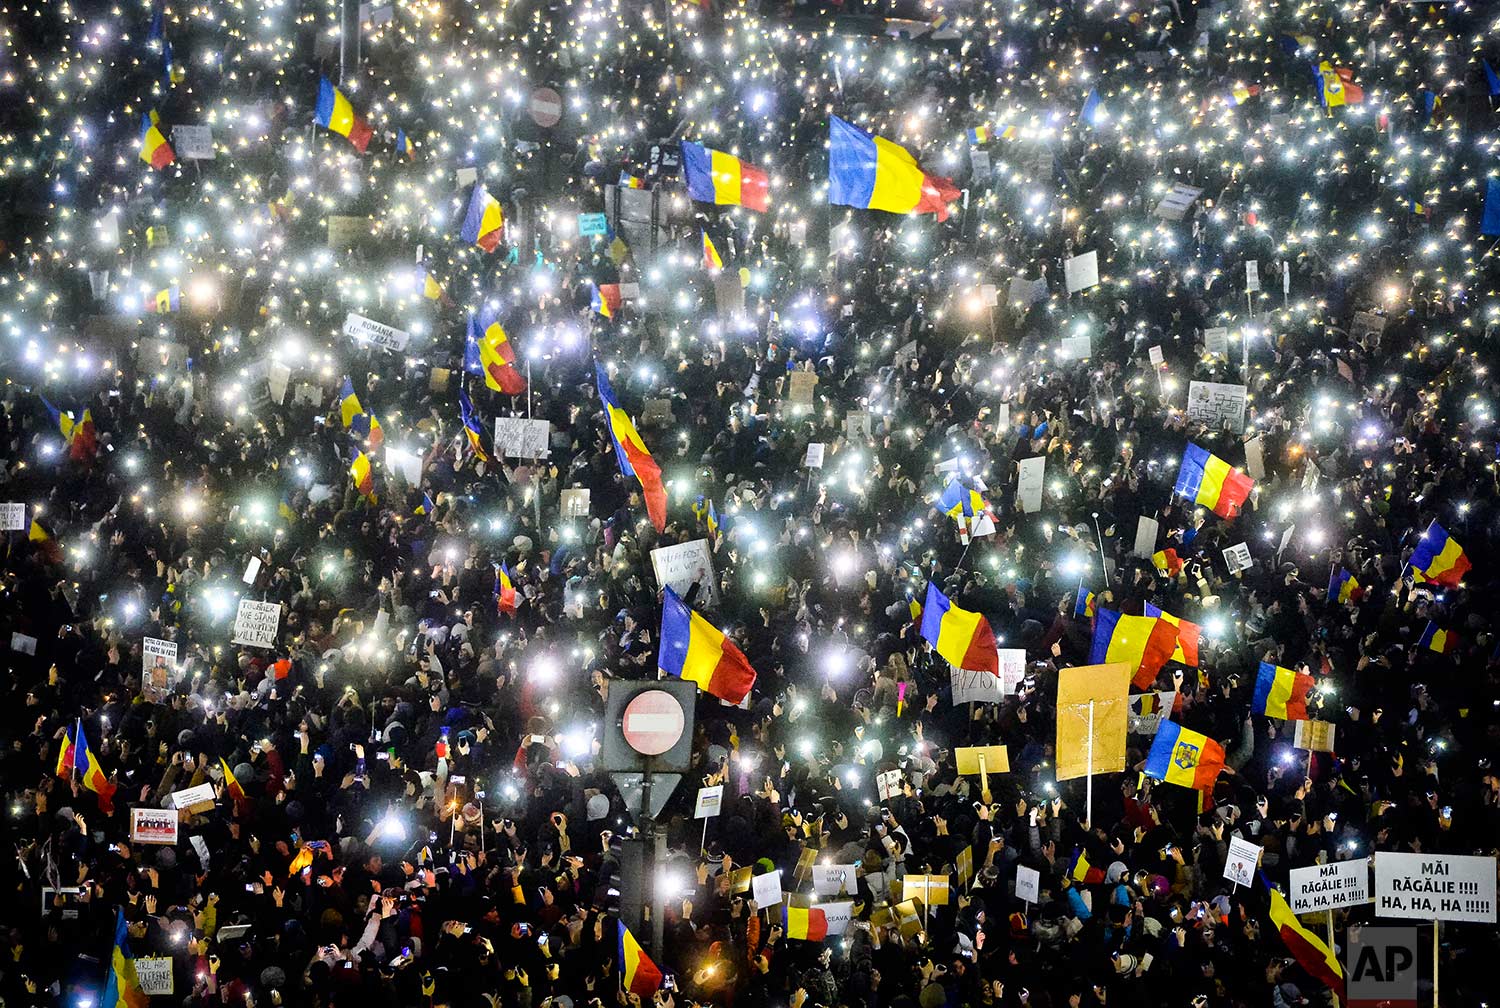  In this Sunday, Feb. 5, 2017 photo, tens of thousands of people shine lights from mobile phones and torches during a protest in front of the government building in Bucharest, Romania. Romania's government met Sunday to repeal an emergency decree tha